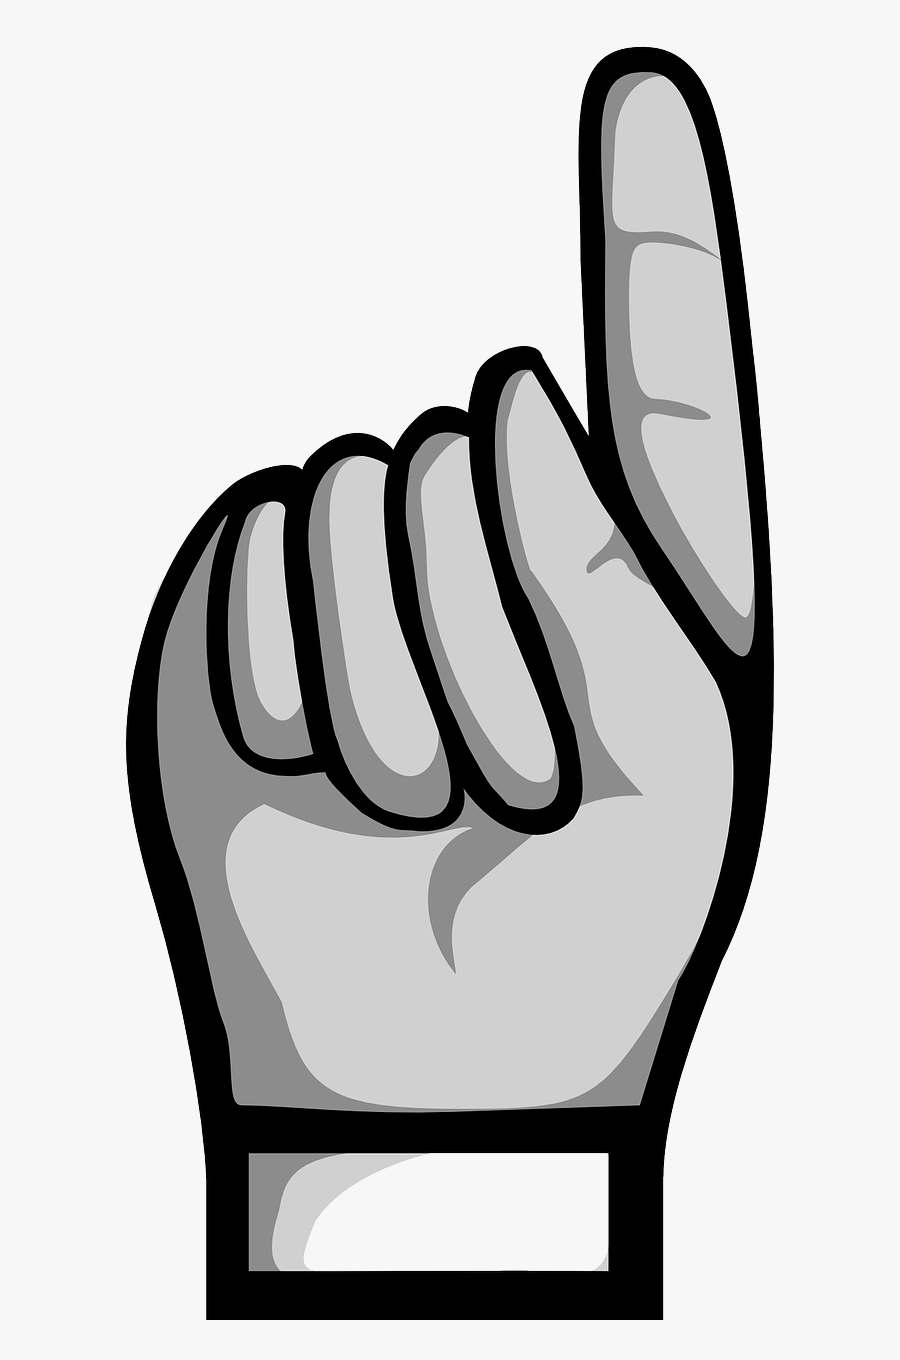 Transparent Hand Pointing Png - Hand Pointing Up Clipart, Transparent Clipart